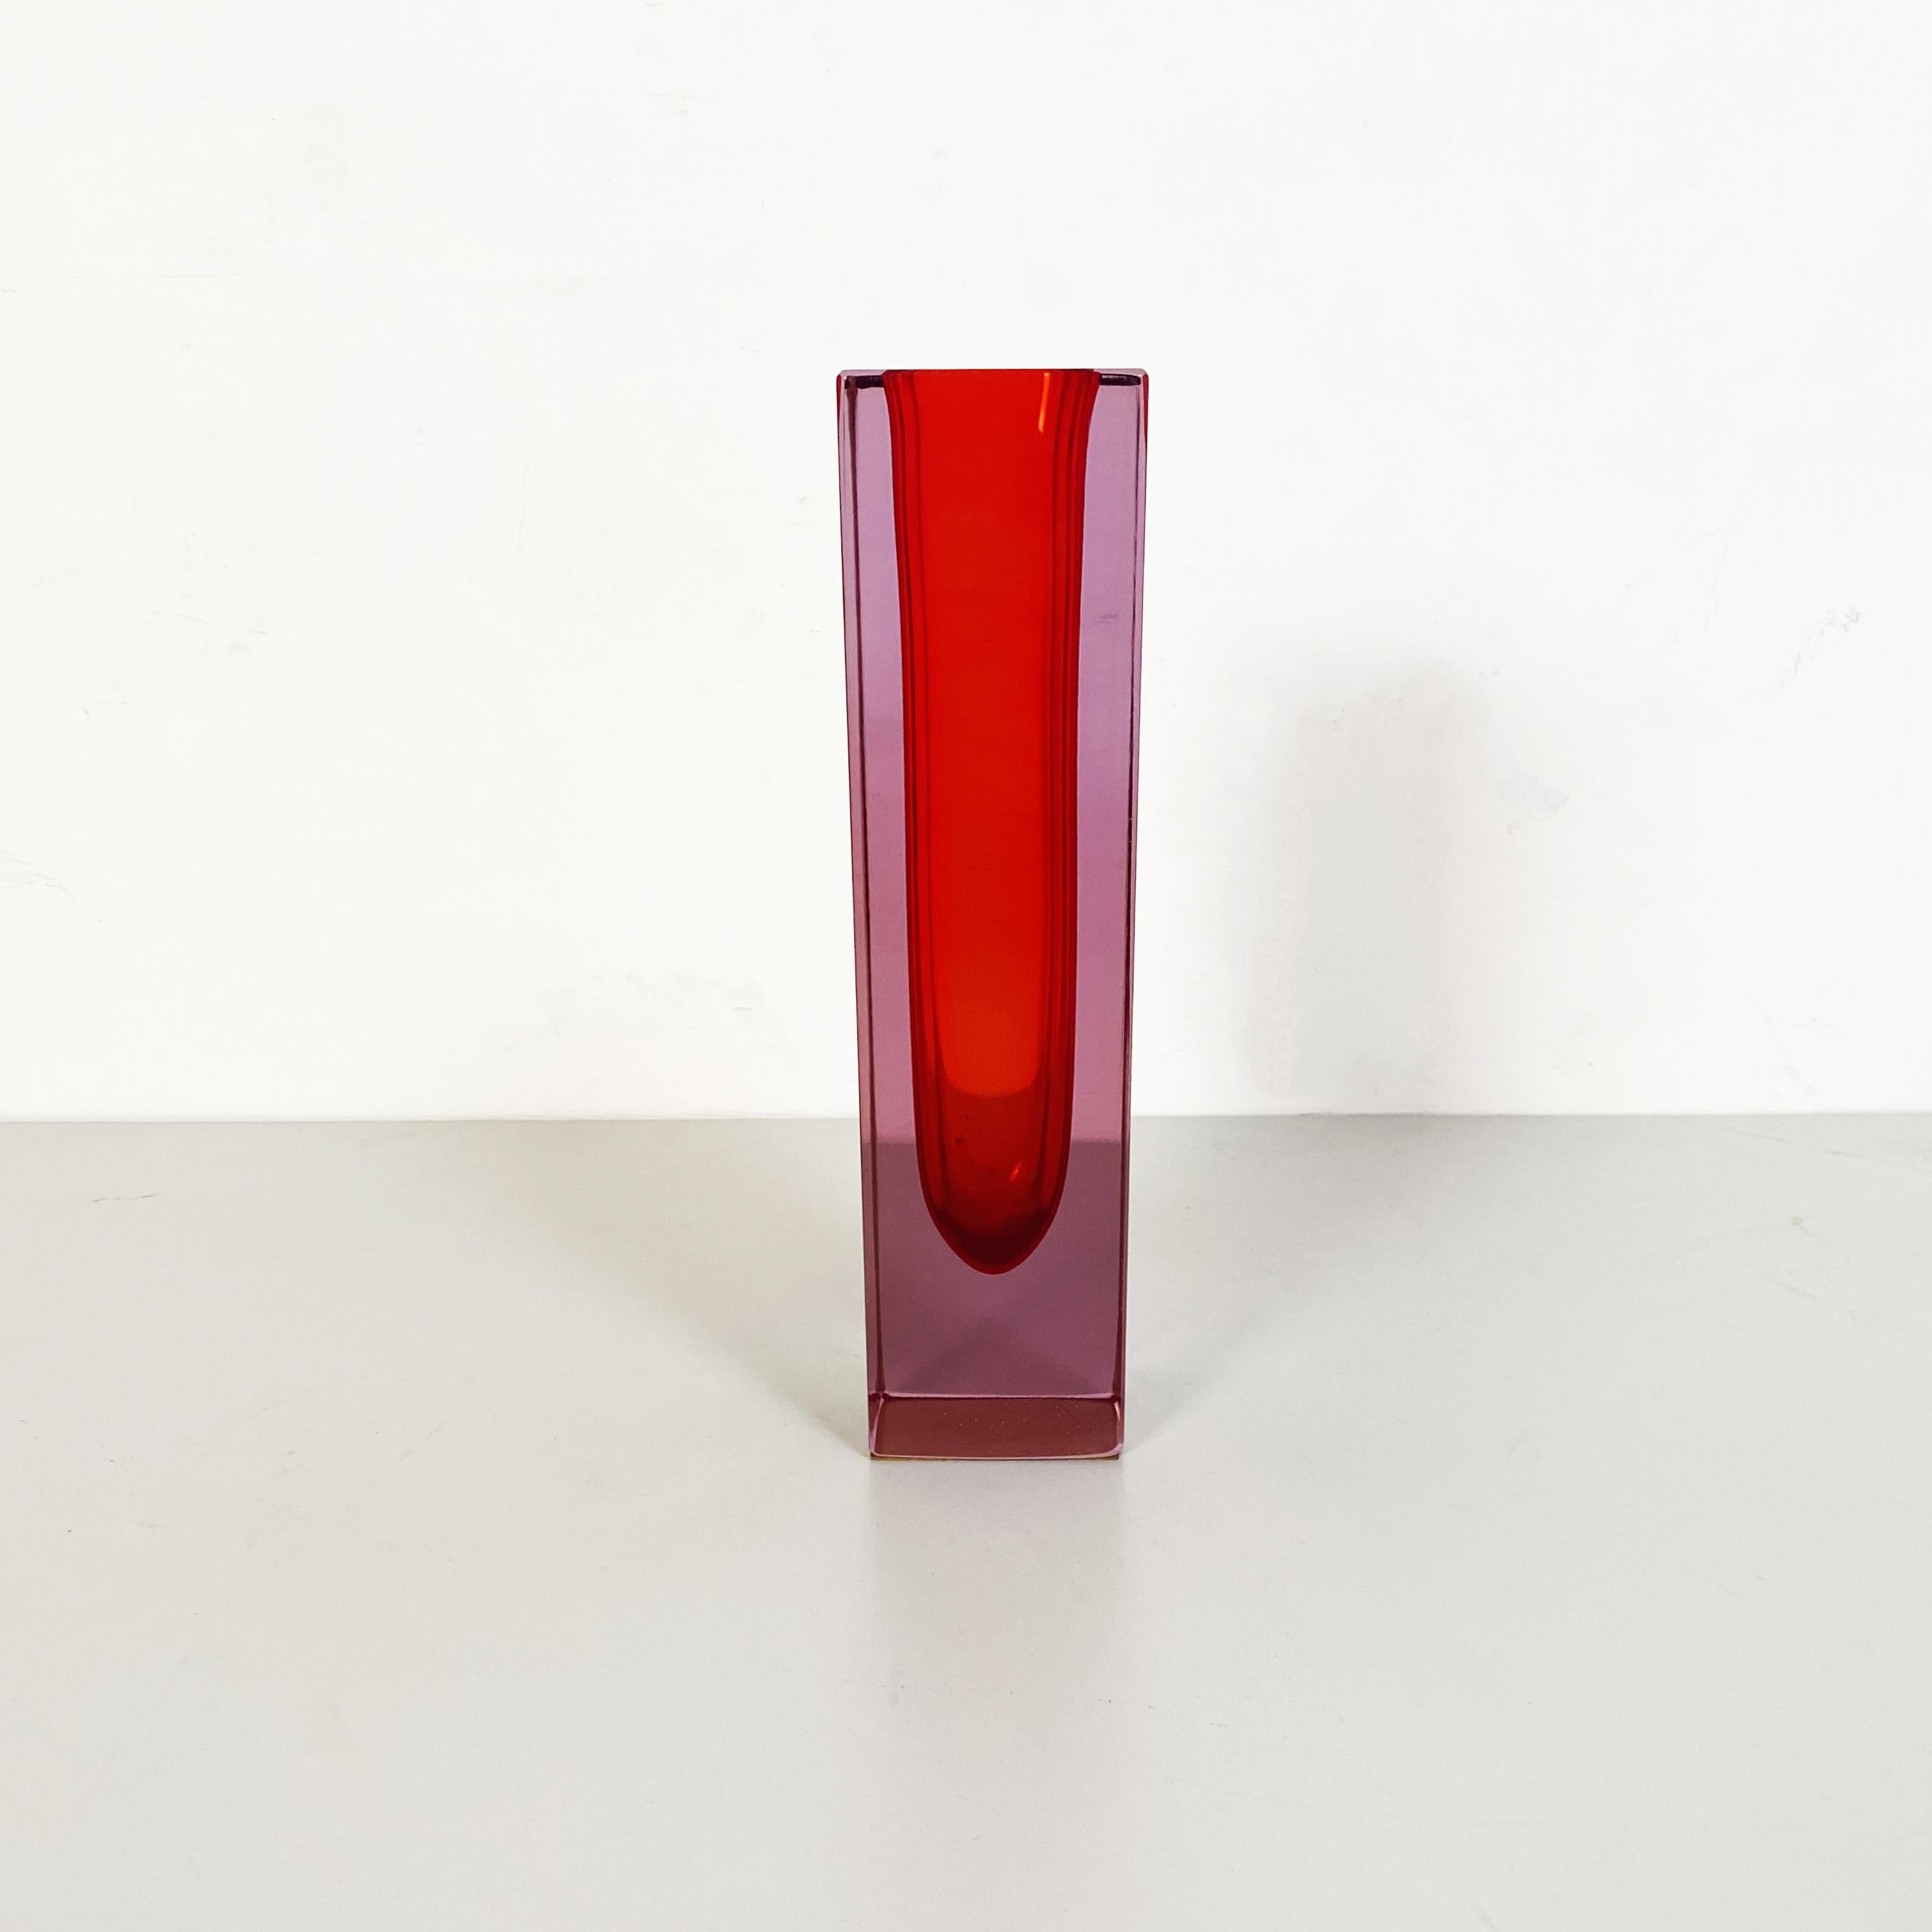 Late 20th Century Italian Mid-Century Red Murano Glass Vase with Internal Purple Shades, 1970s For Sale